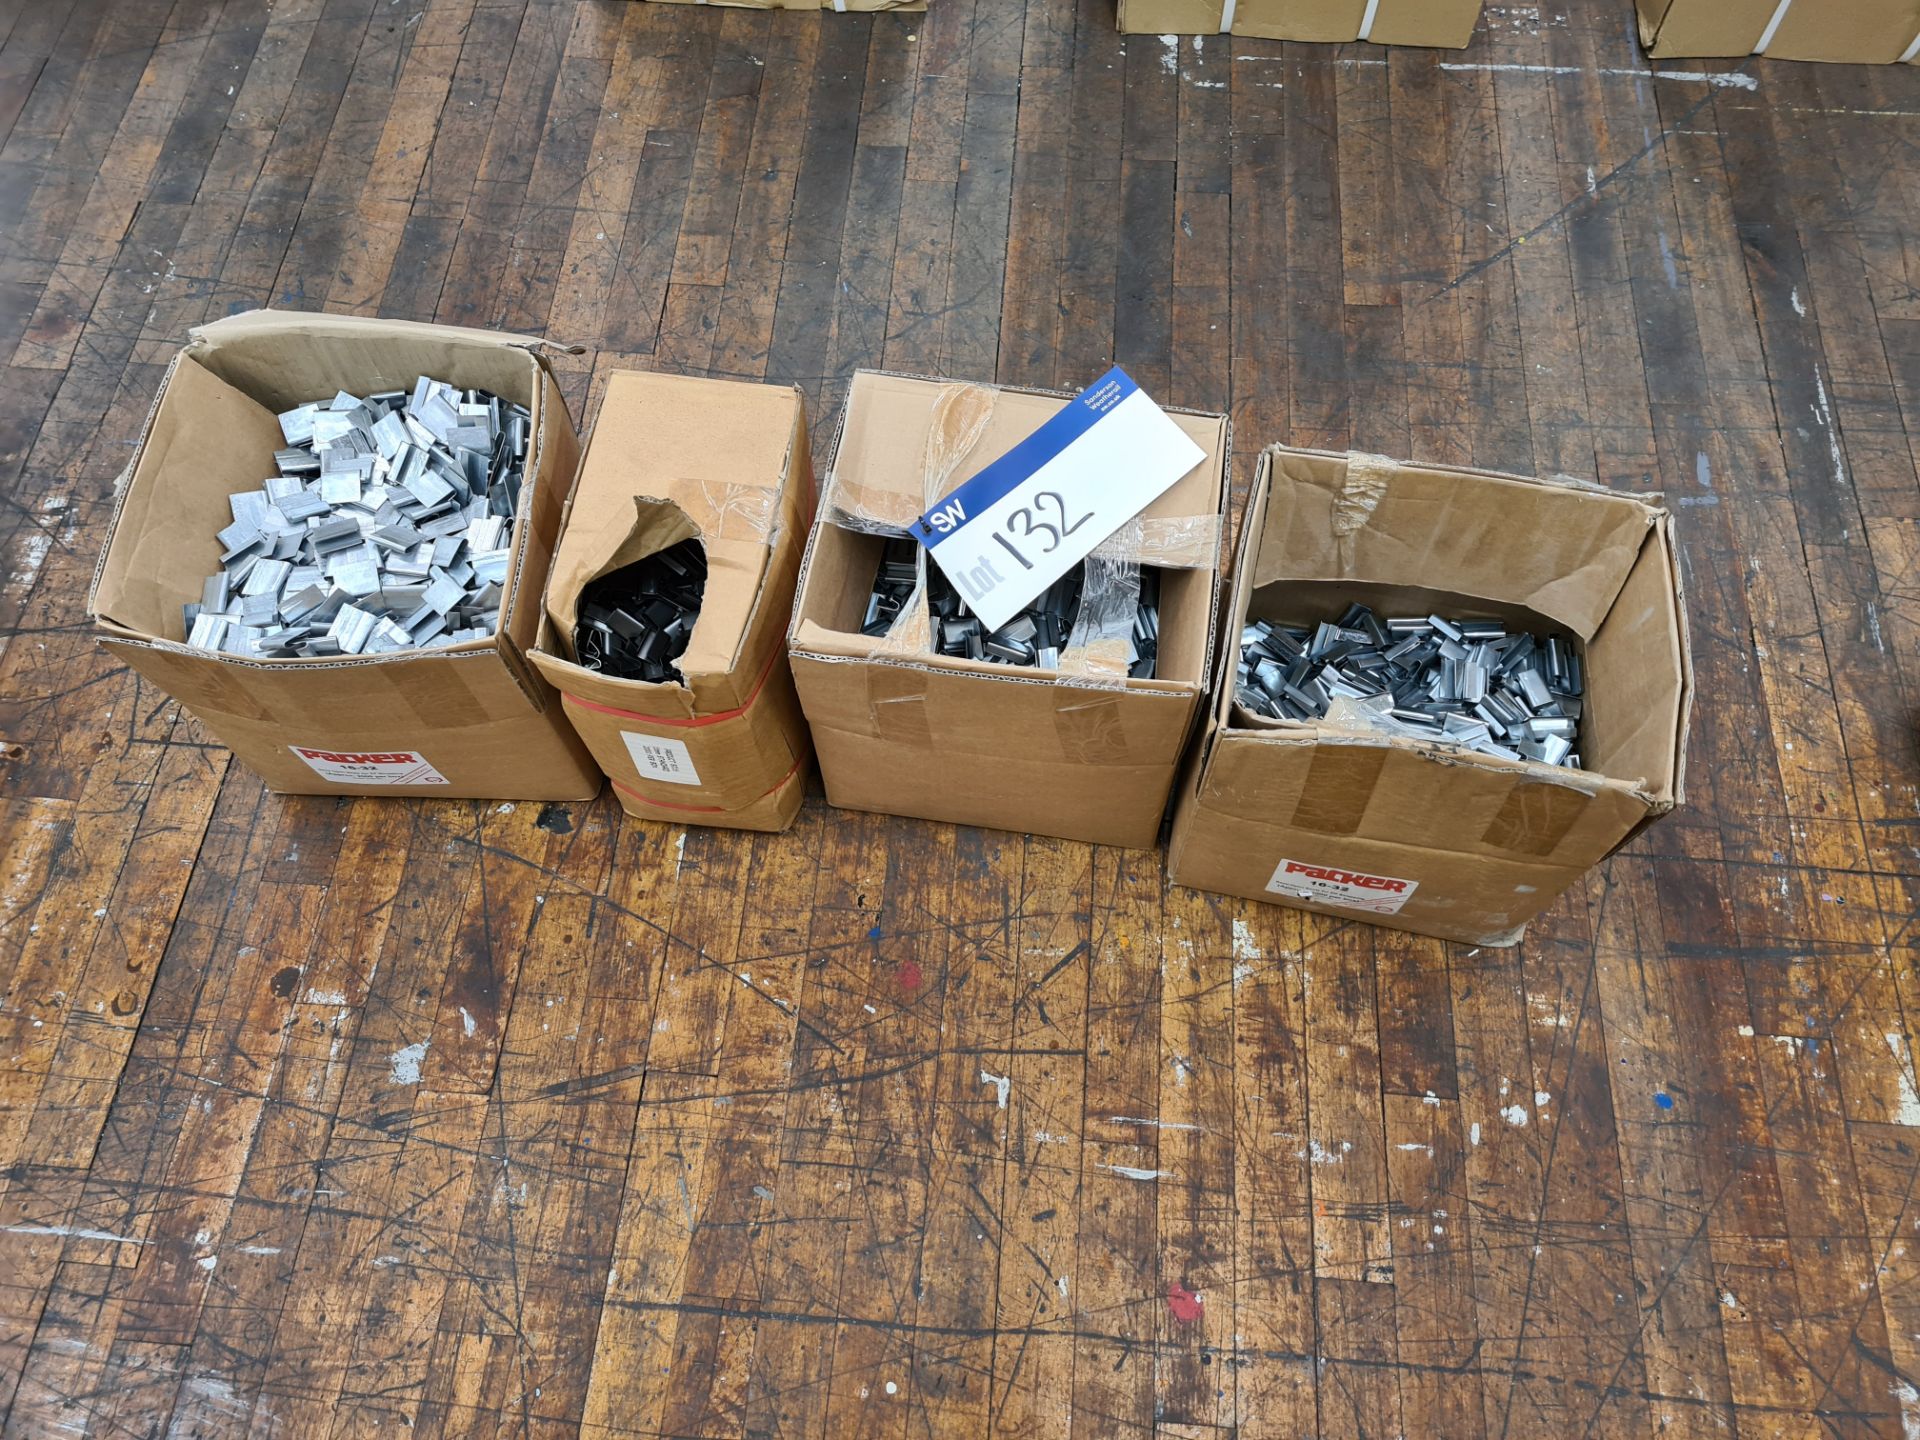 Strap Banding Clips, as set out in four boxes